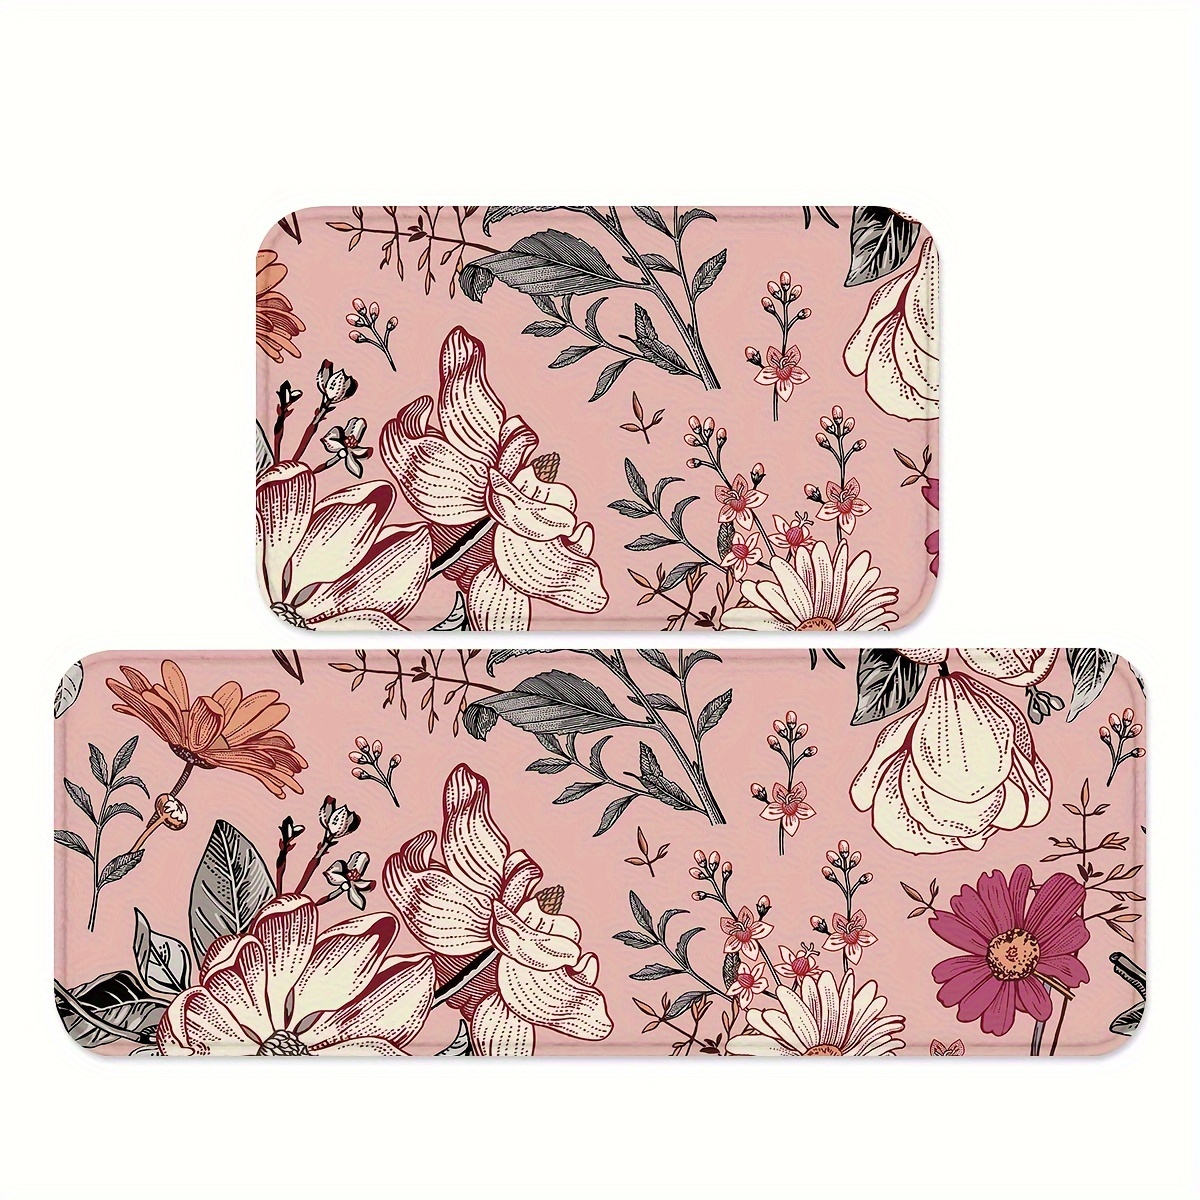 

1/2pcs Lovely Kitchen Mats, Non-slip And Washable Carpets, Soft Absorbent Rugs, For Bedroom, Laundry Room, Bathroom, Home Decor, Spring Decor, Valentine's Day, 2 Sizes Can Be Ordered Separately